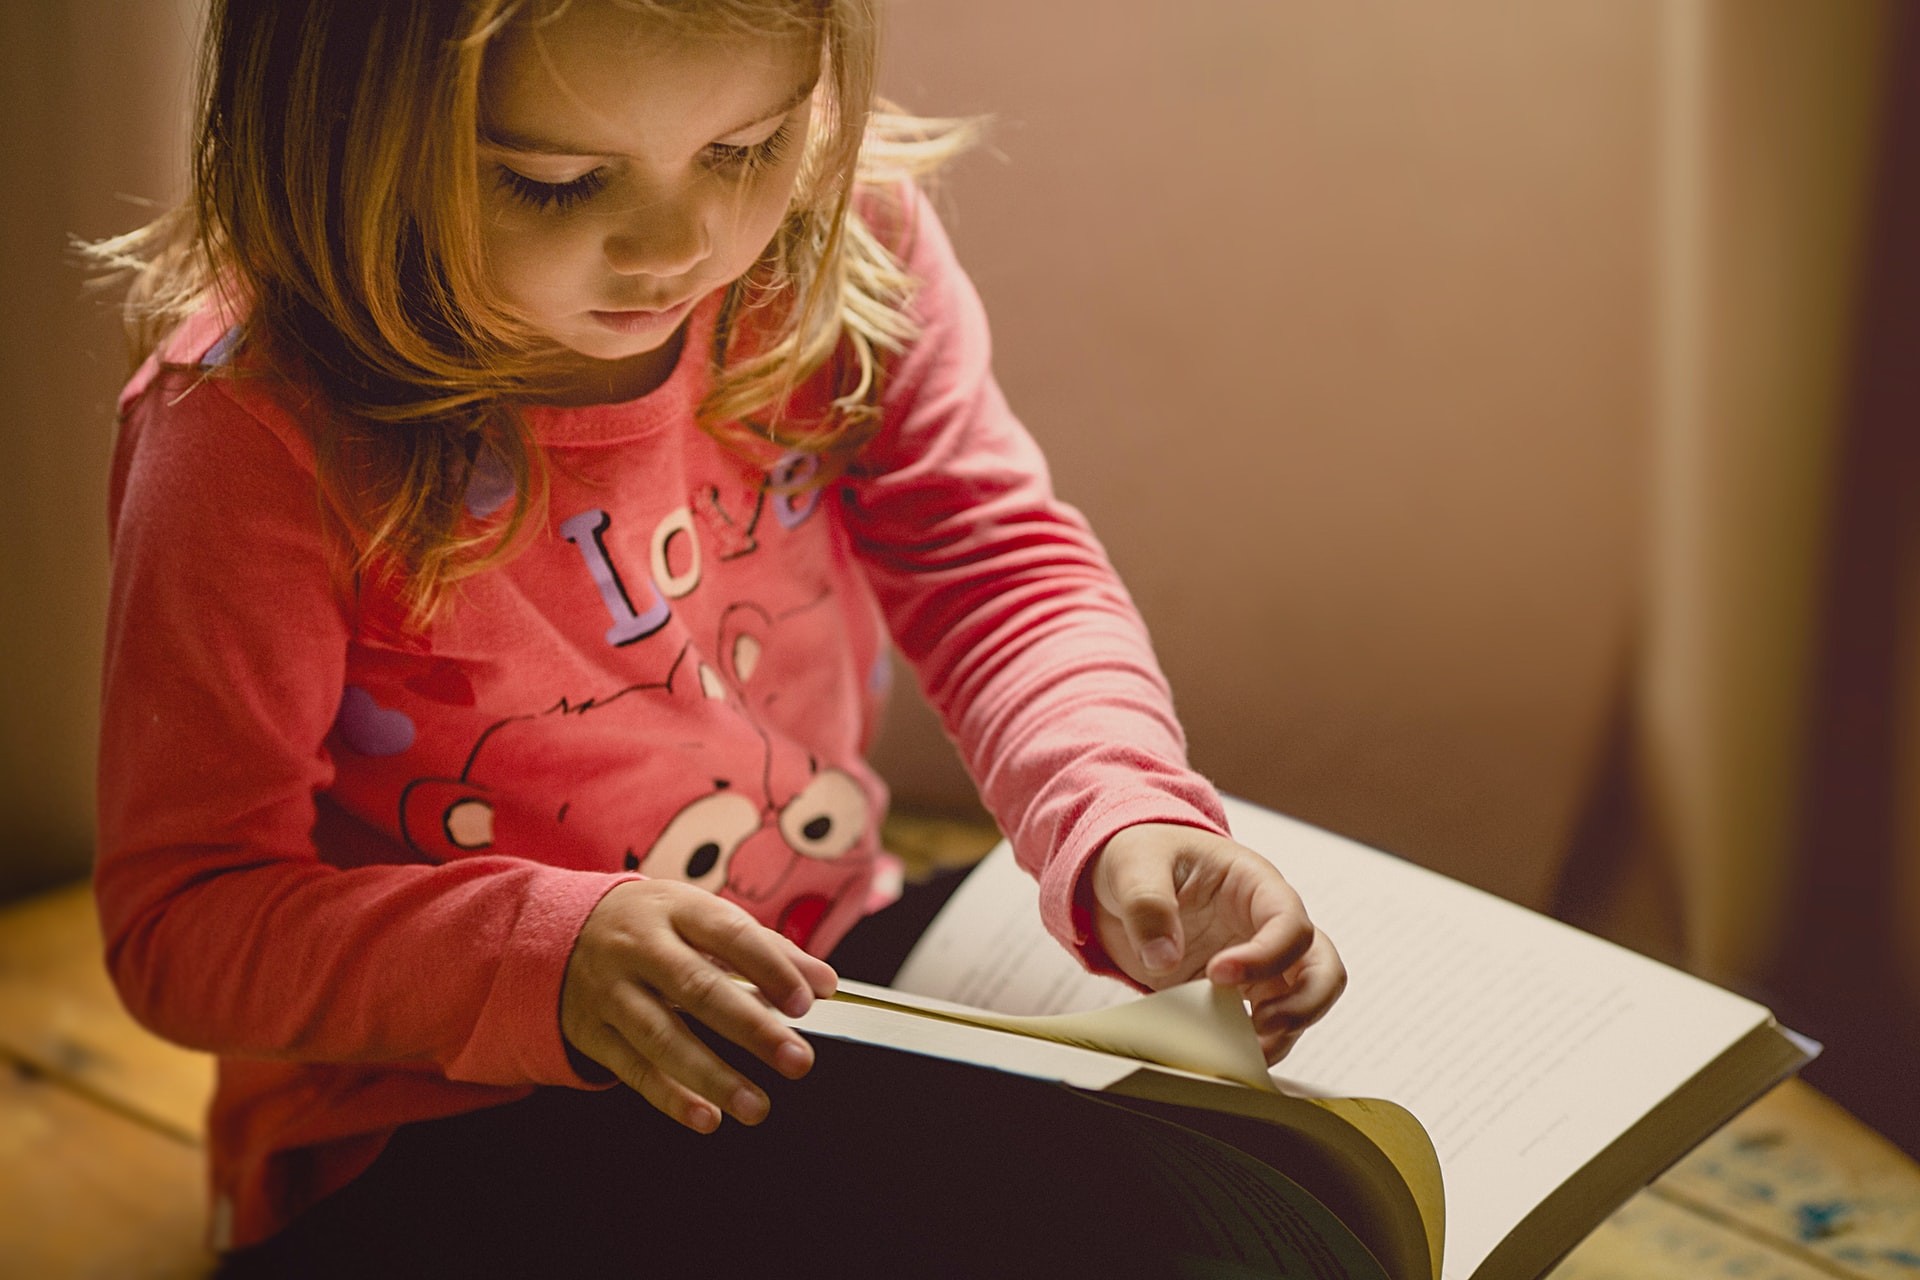 A young girl in a pink shirt reads a storybook to improve reading comprehension skills.